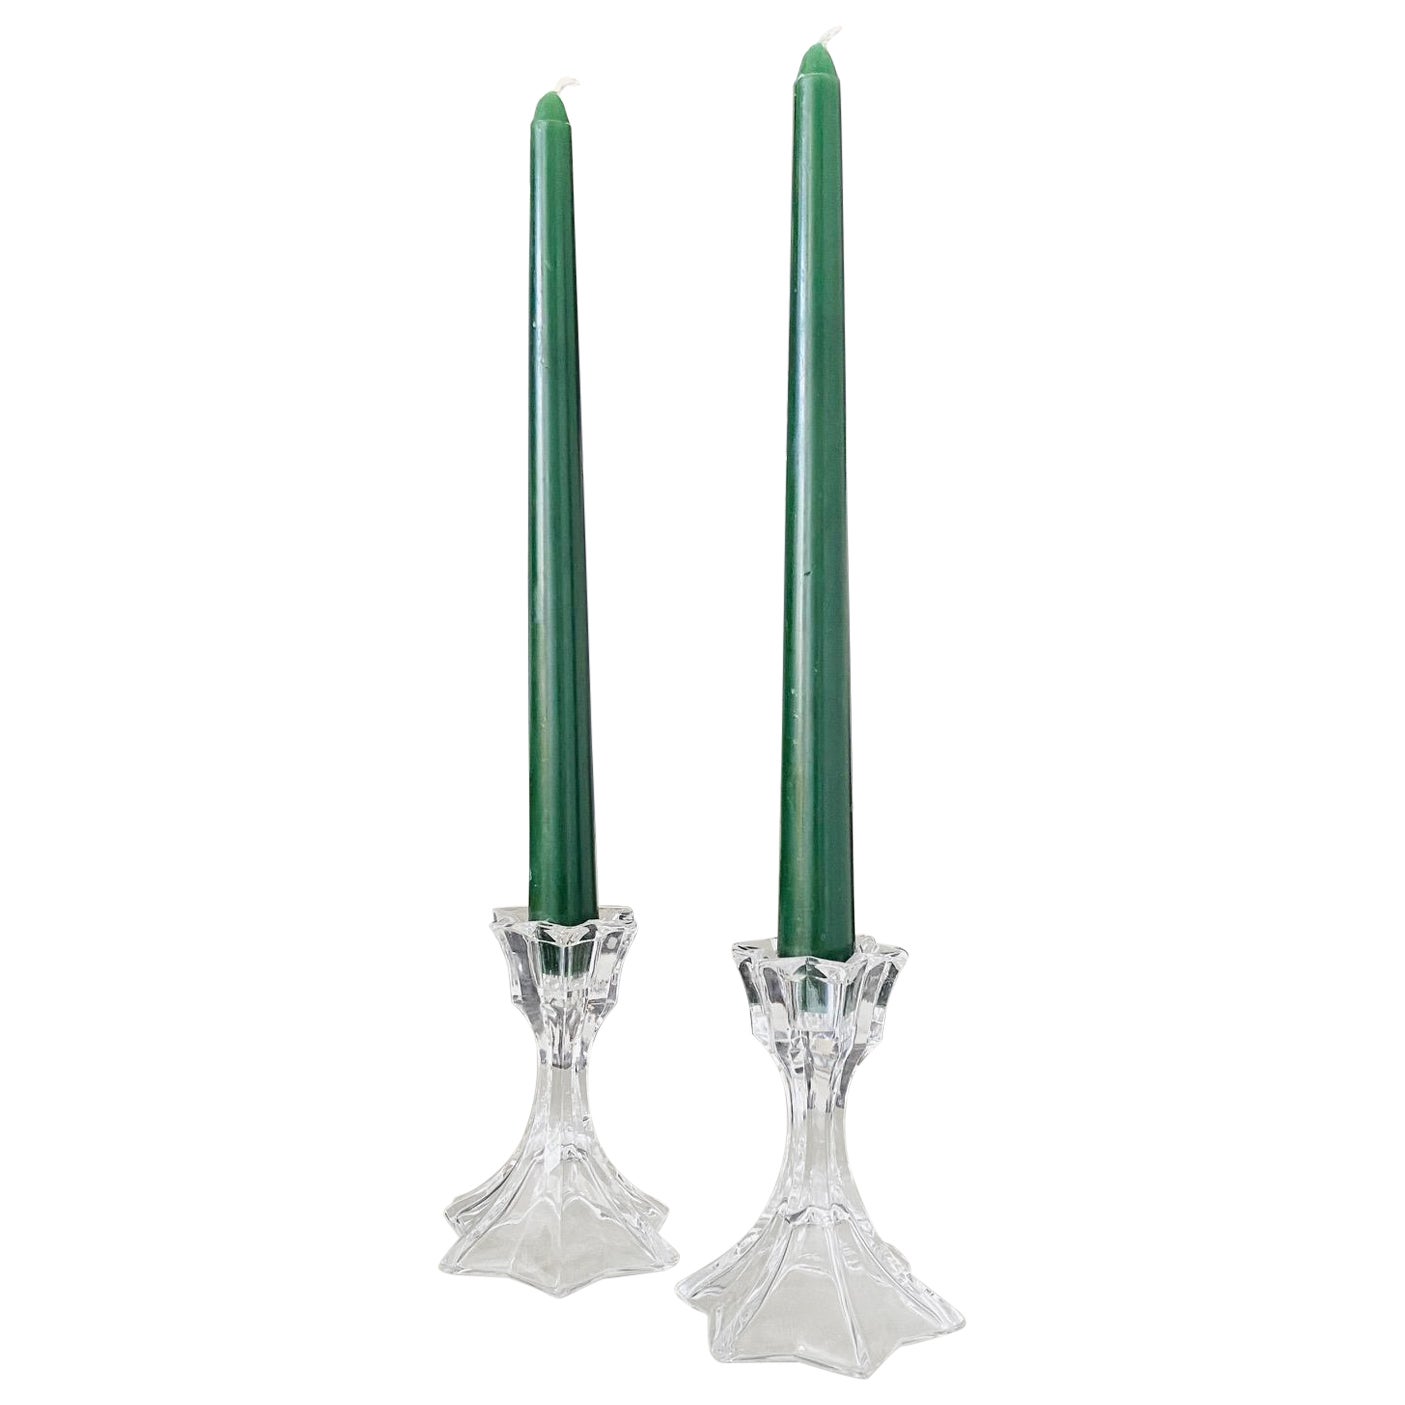 Pair of Mid-Century Modern Faceted Crystal Candleholders, 1970s